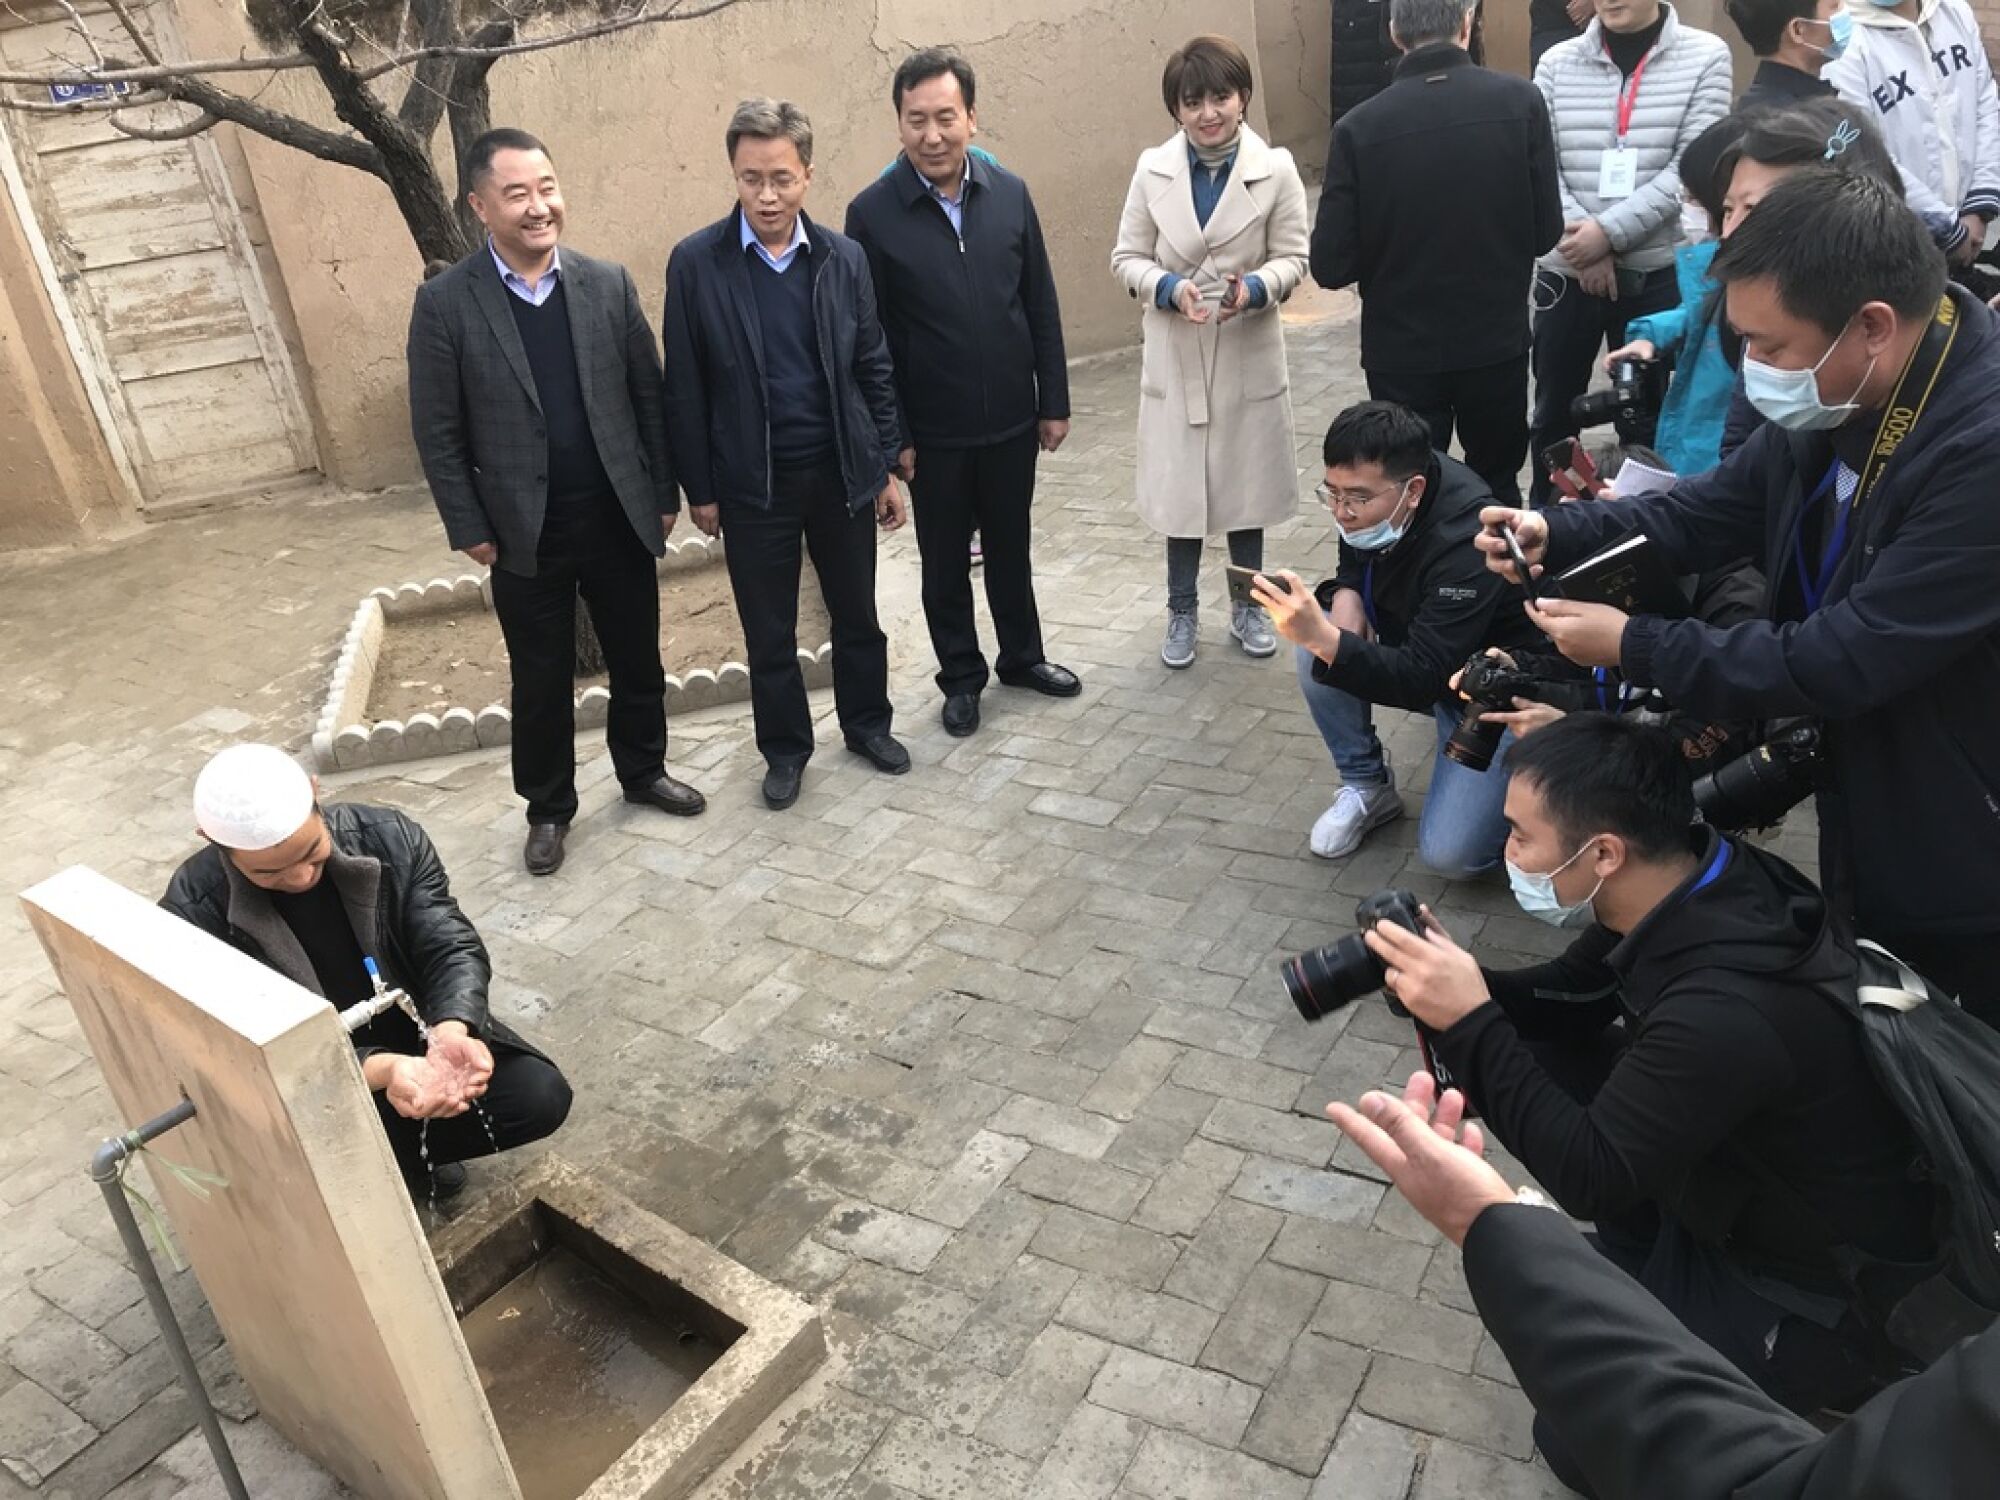 Inside a village museum honoring Xi Jinping's visit to Bulengou in 2013, a Dongxiang man washed his hands in running water.